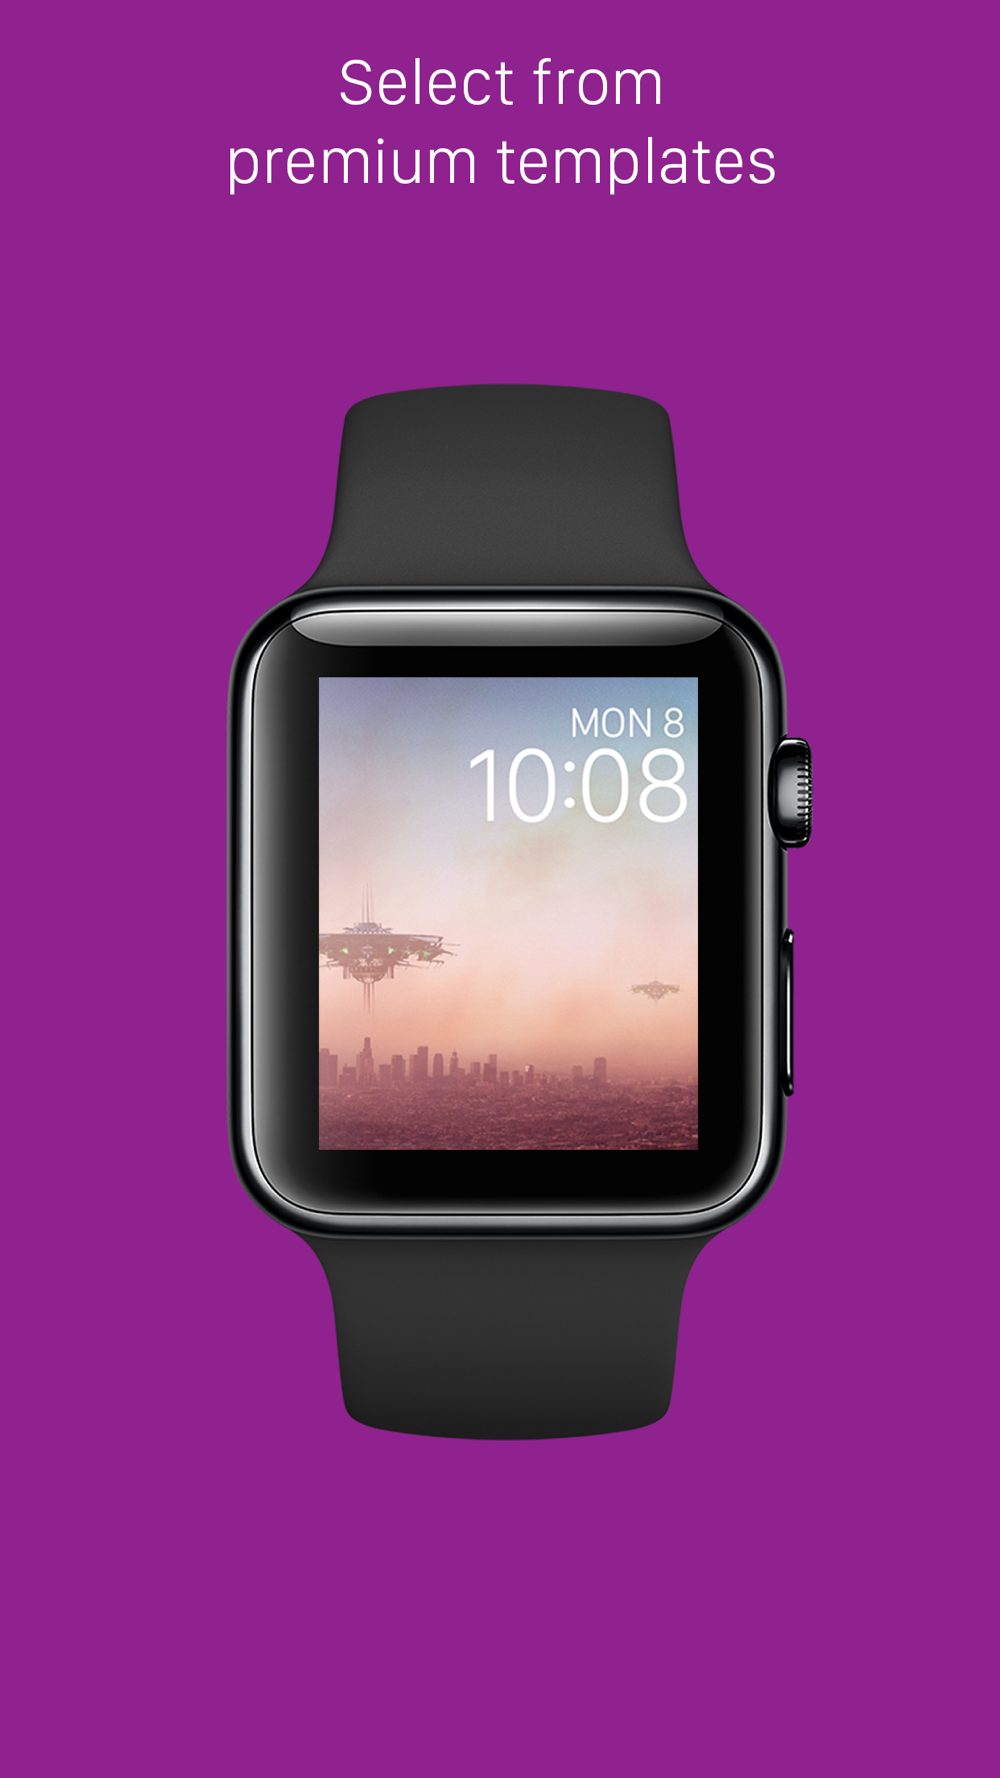 Faces - Custom backgrounds for the Apple Watch photo watch face Download  App for iPhone 